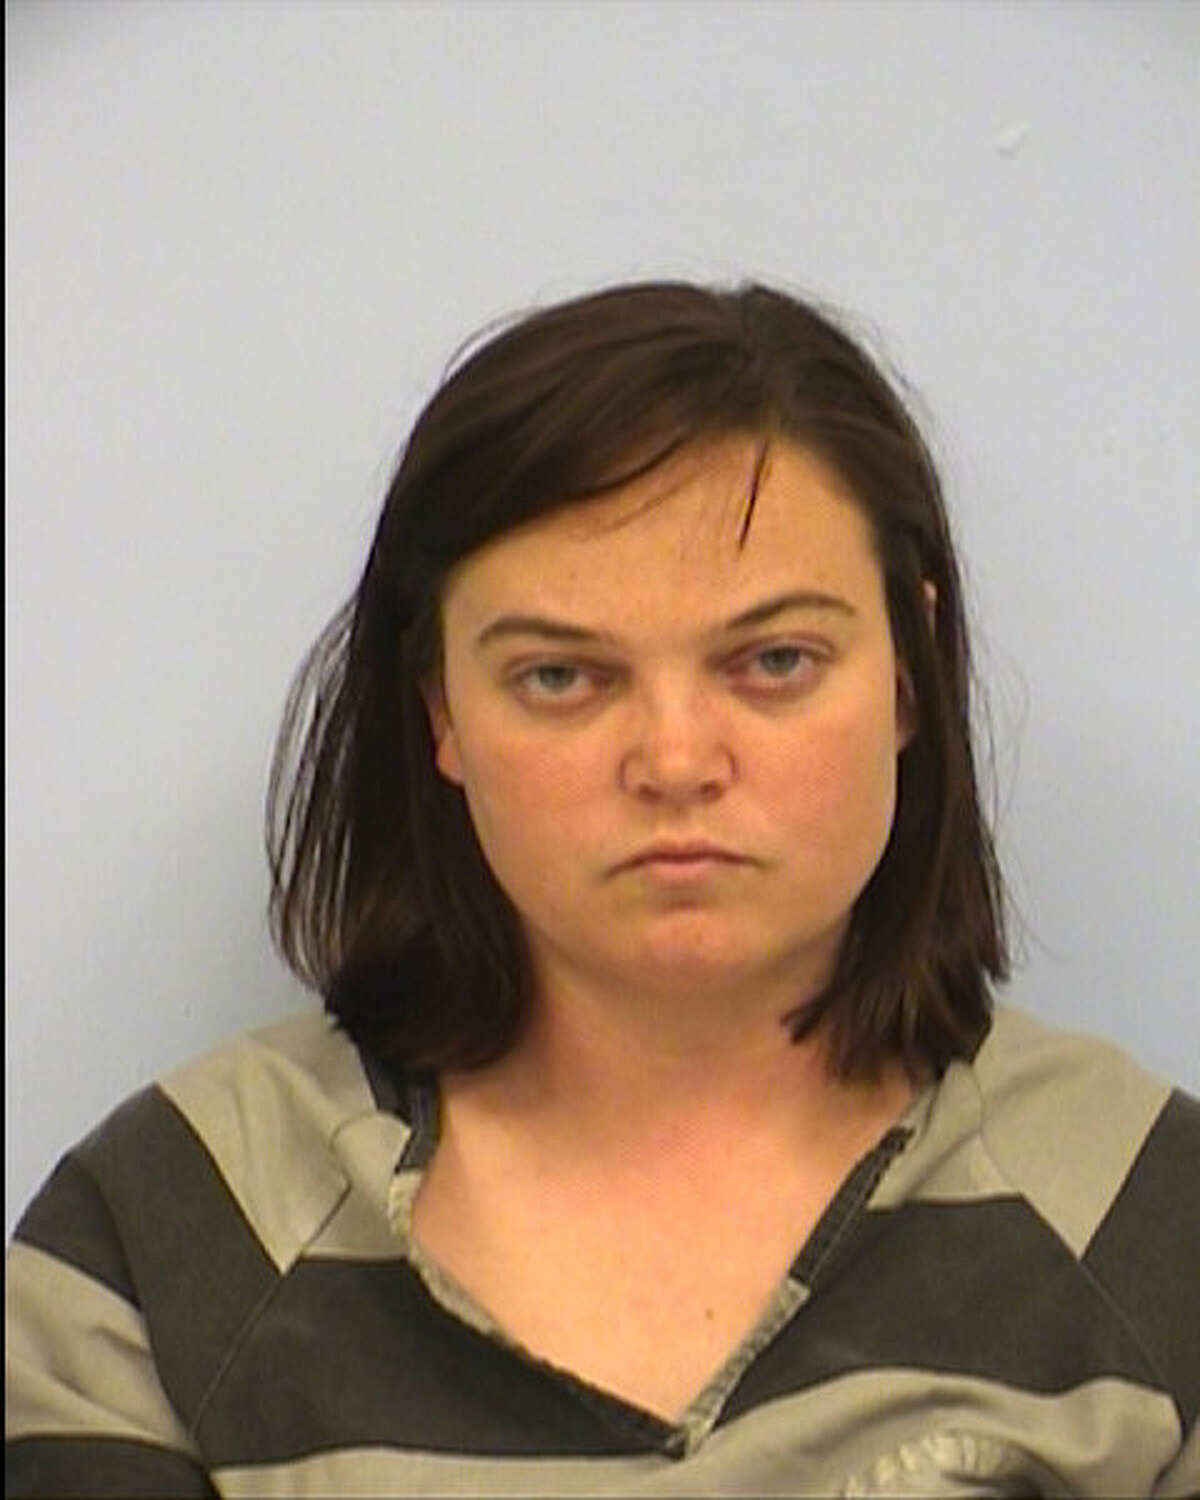 Ashley Nikole Weir, 31, was arrested Monday in Lago Vista and charged on three counts of tattoos prohibited for certain persons, a Class A misdemeanor. If convicted, Weir could spend up to three years in prison.